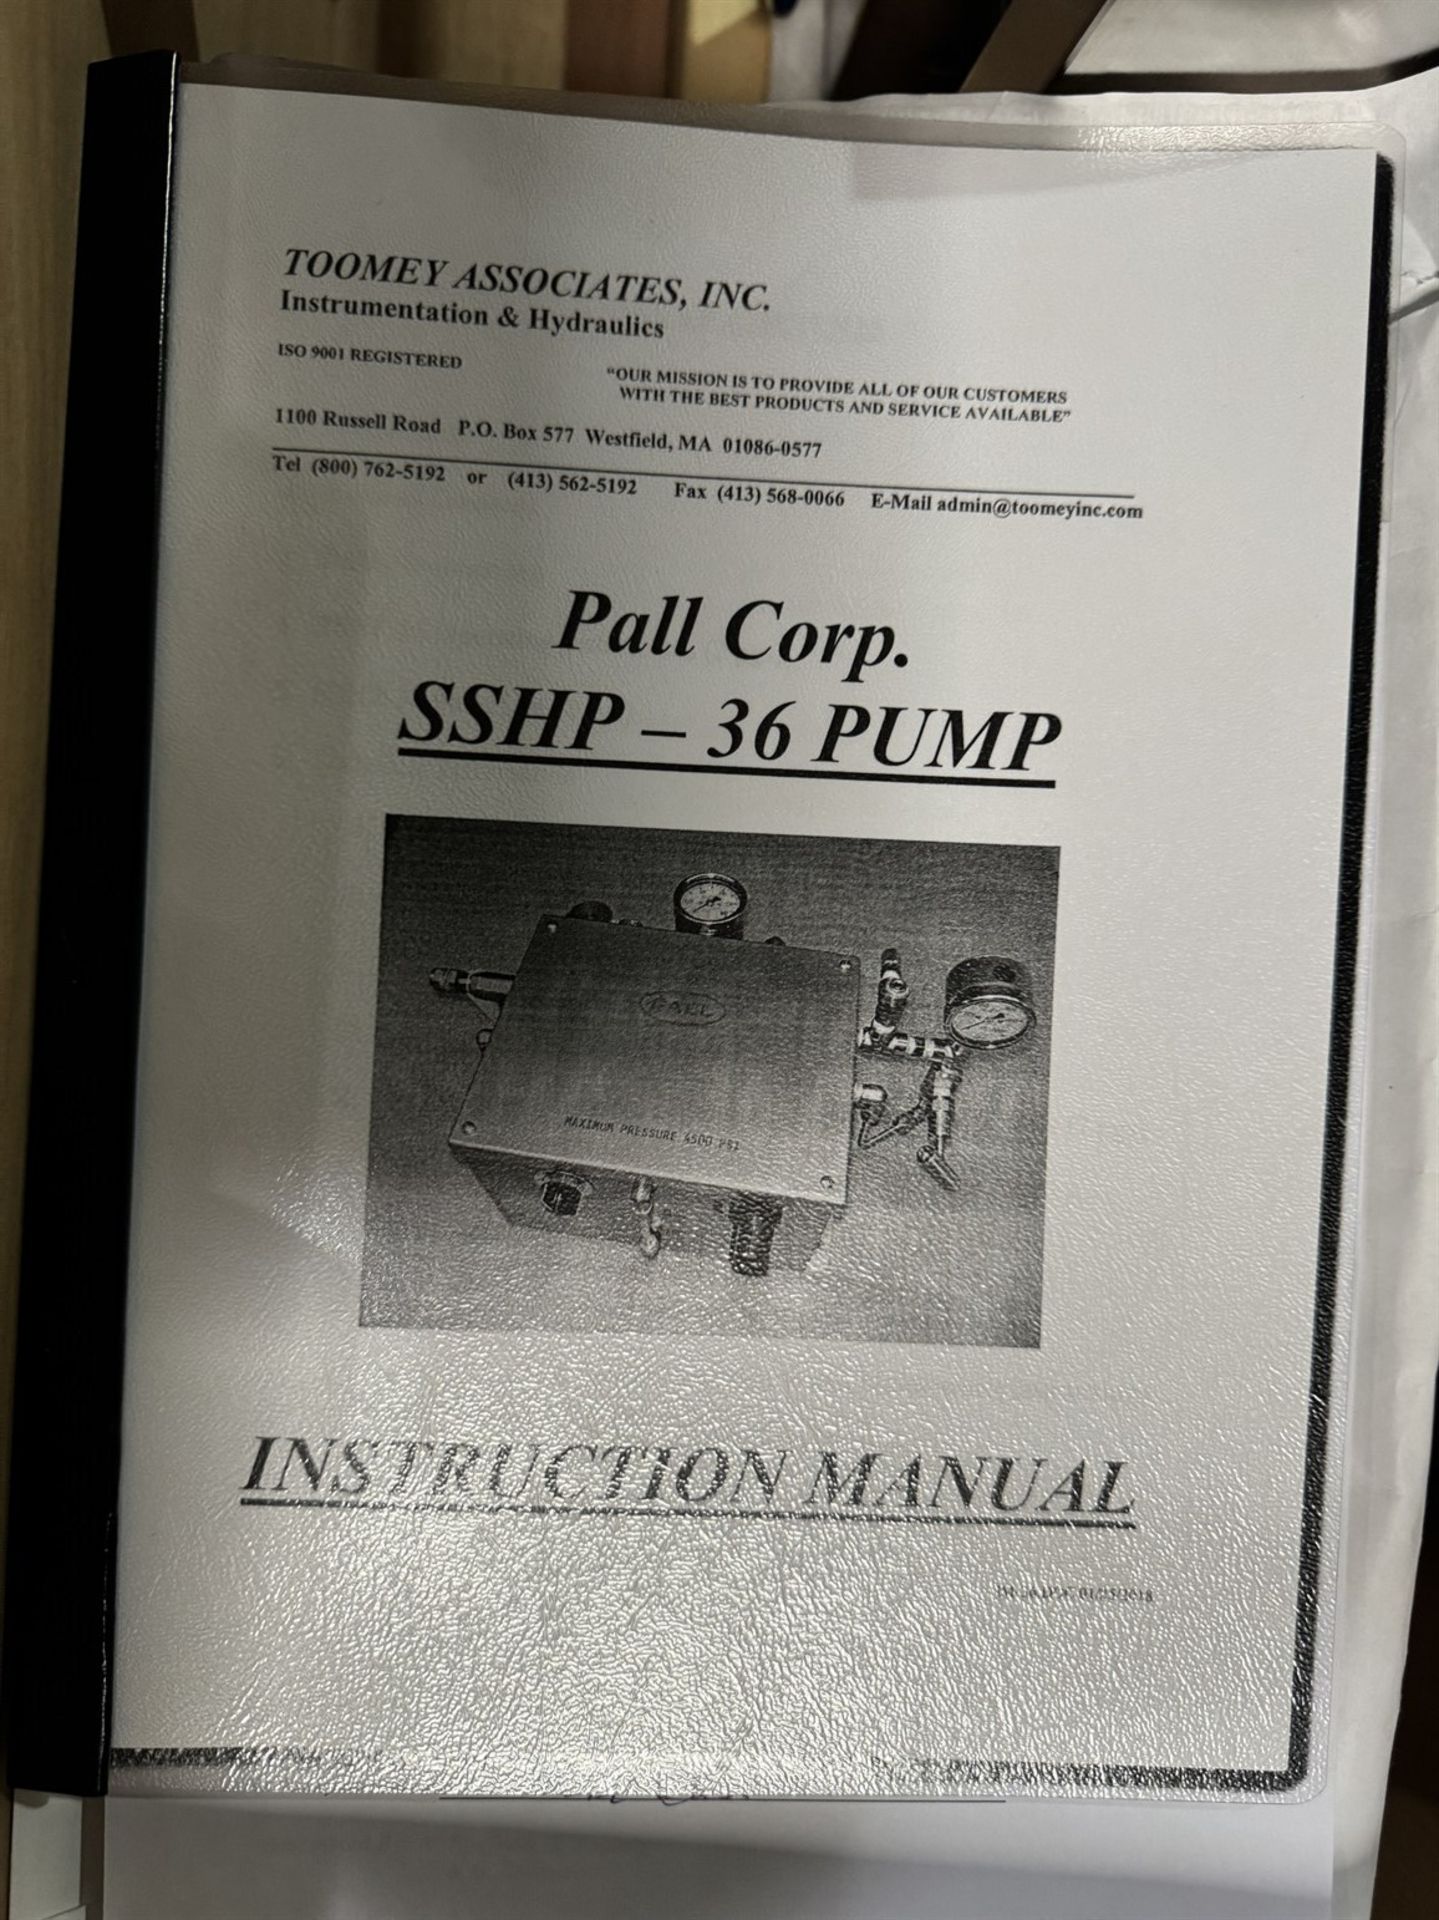 PALL CORP Ultrafiltration Filter Holder, w/ SSHP-36 Pump - Image 4 of 5